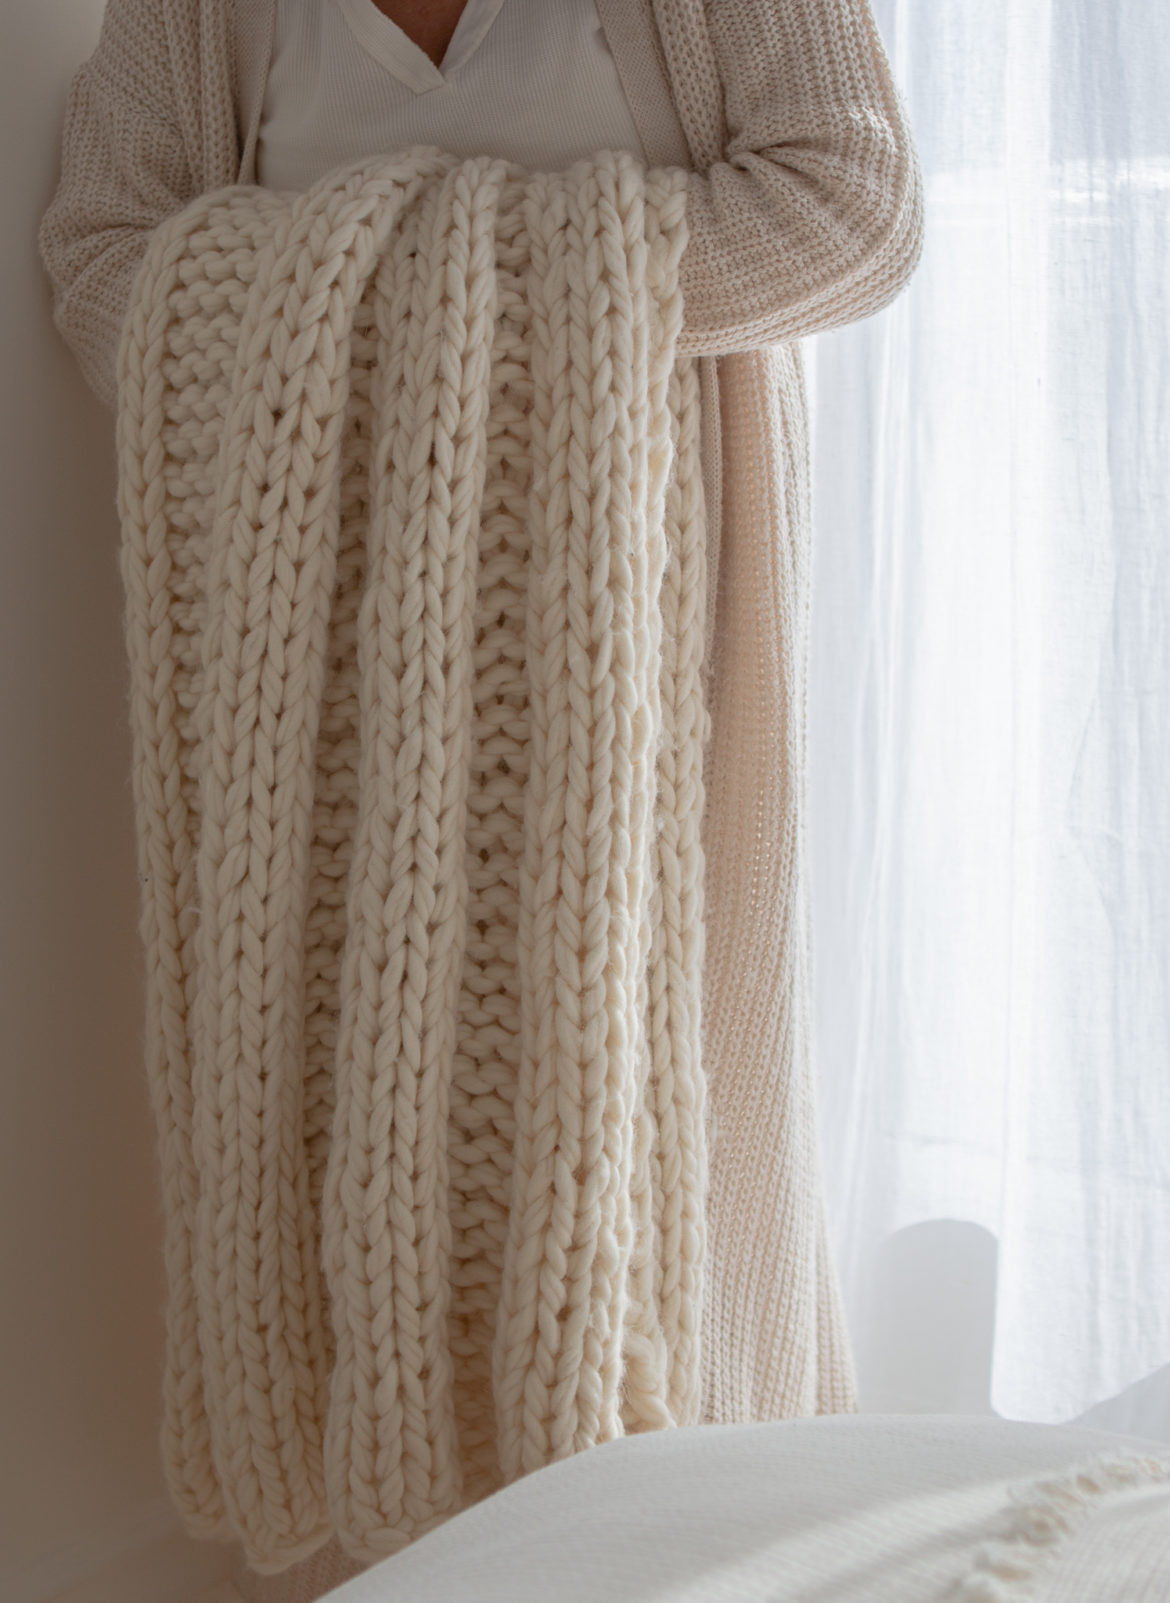 Free chunky knit blanket pattern. Learn how to make a chunky knit blanket in a weekend